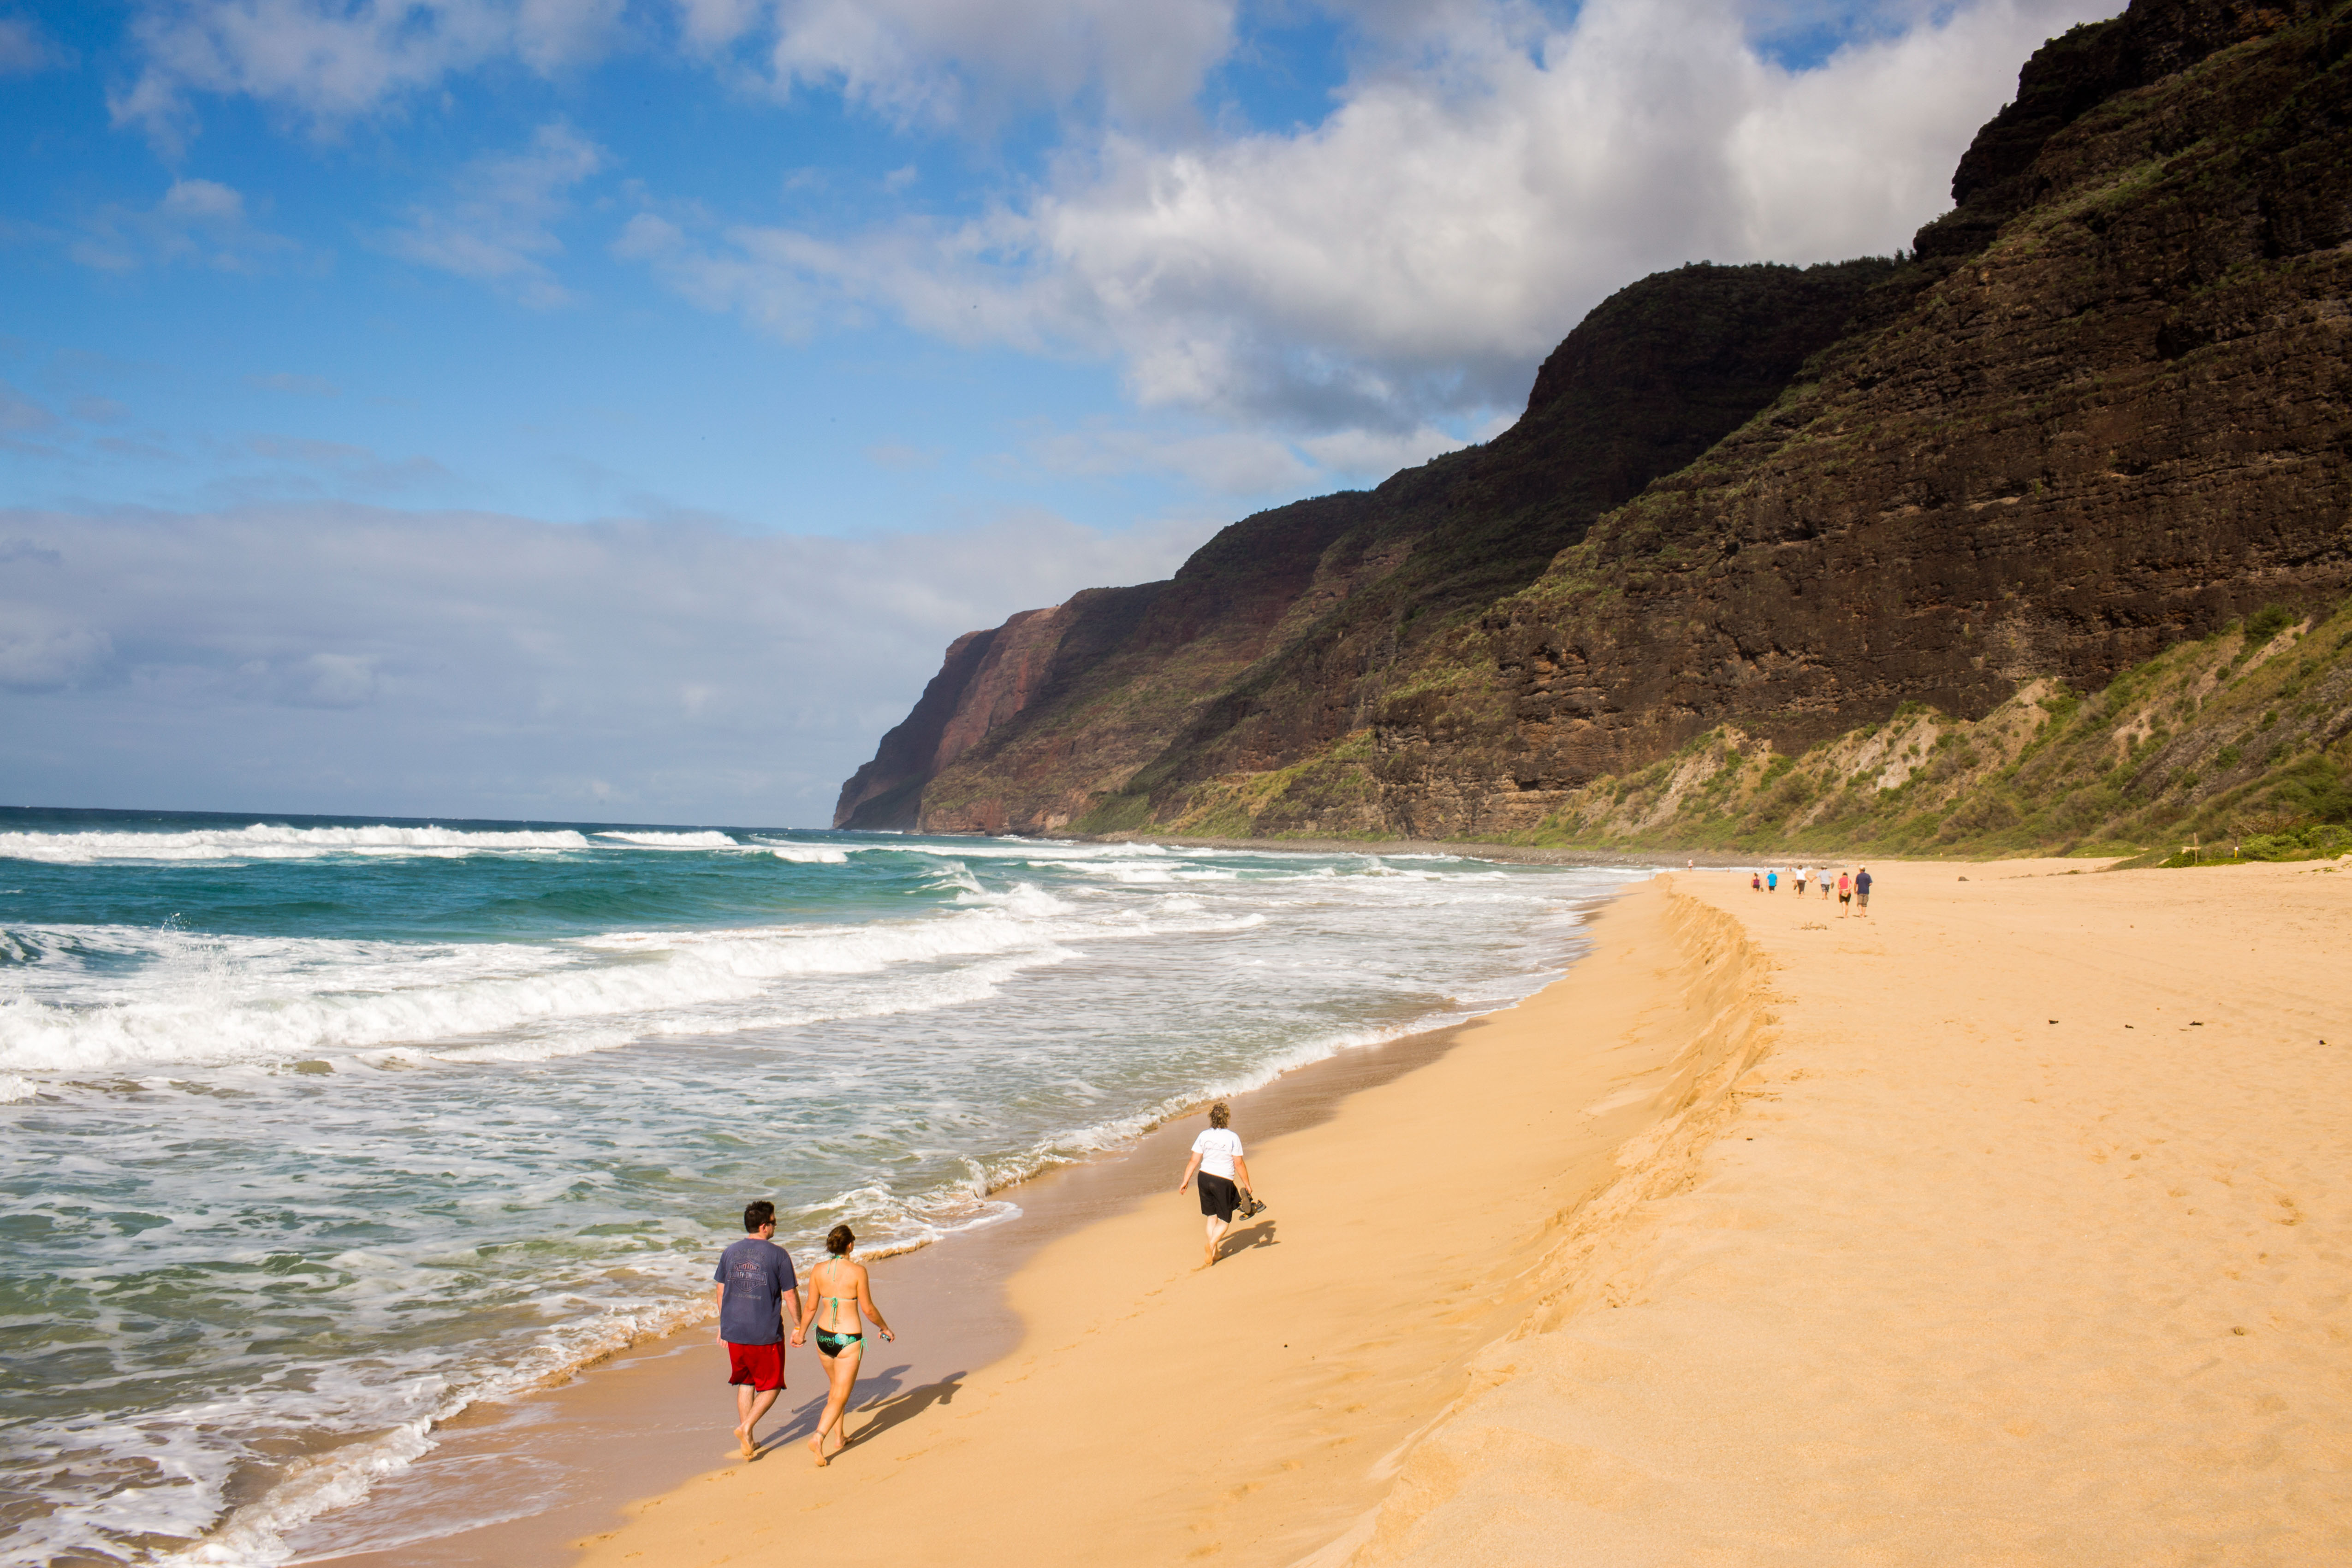 Although remote, the beach at Polihale State Park a worthwhile destination for romantics hoping to go off the beaten path. Image by Adam Hester / Getty